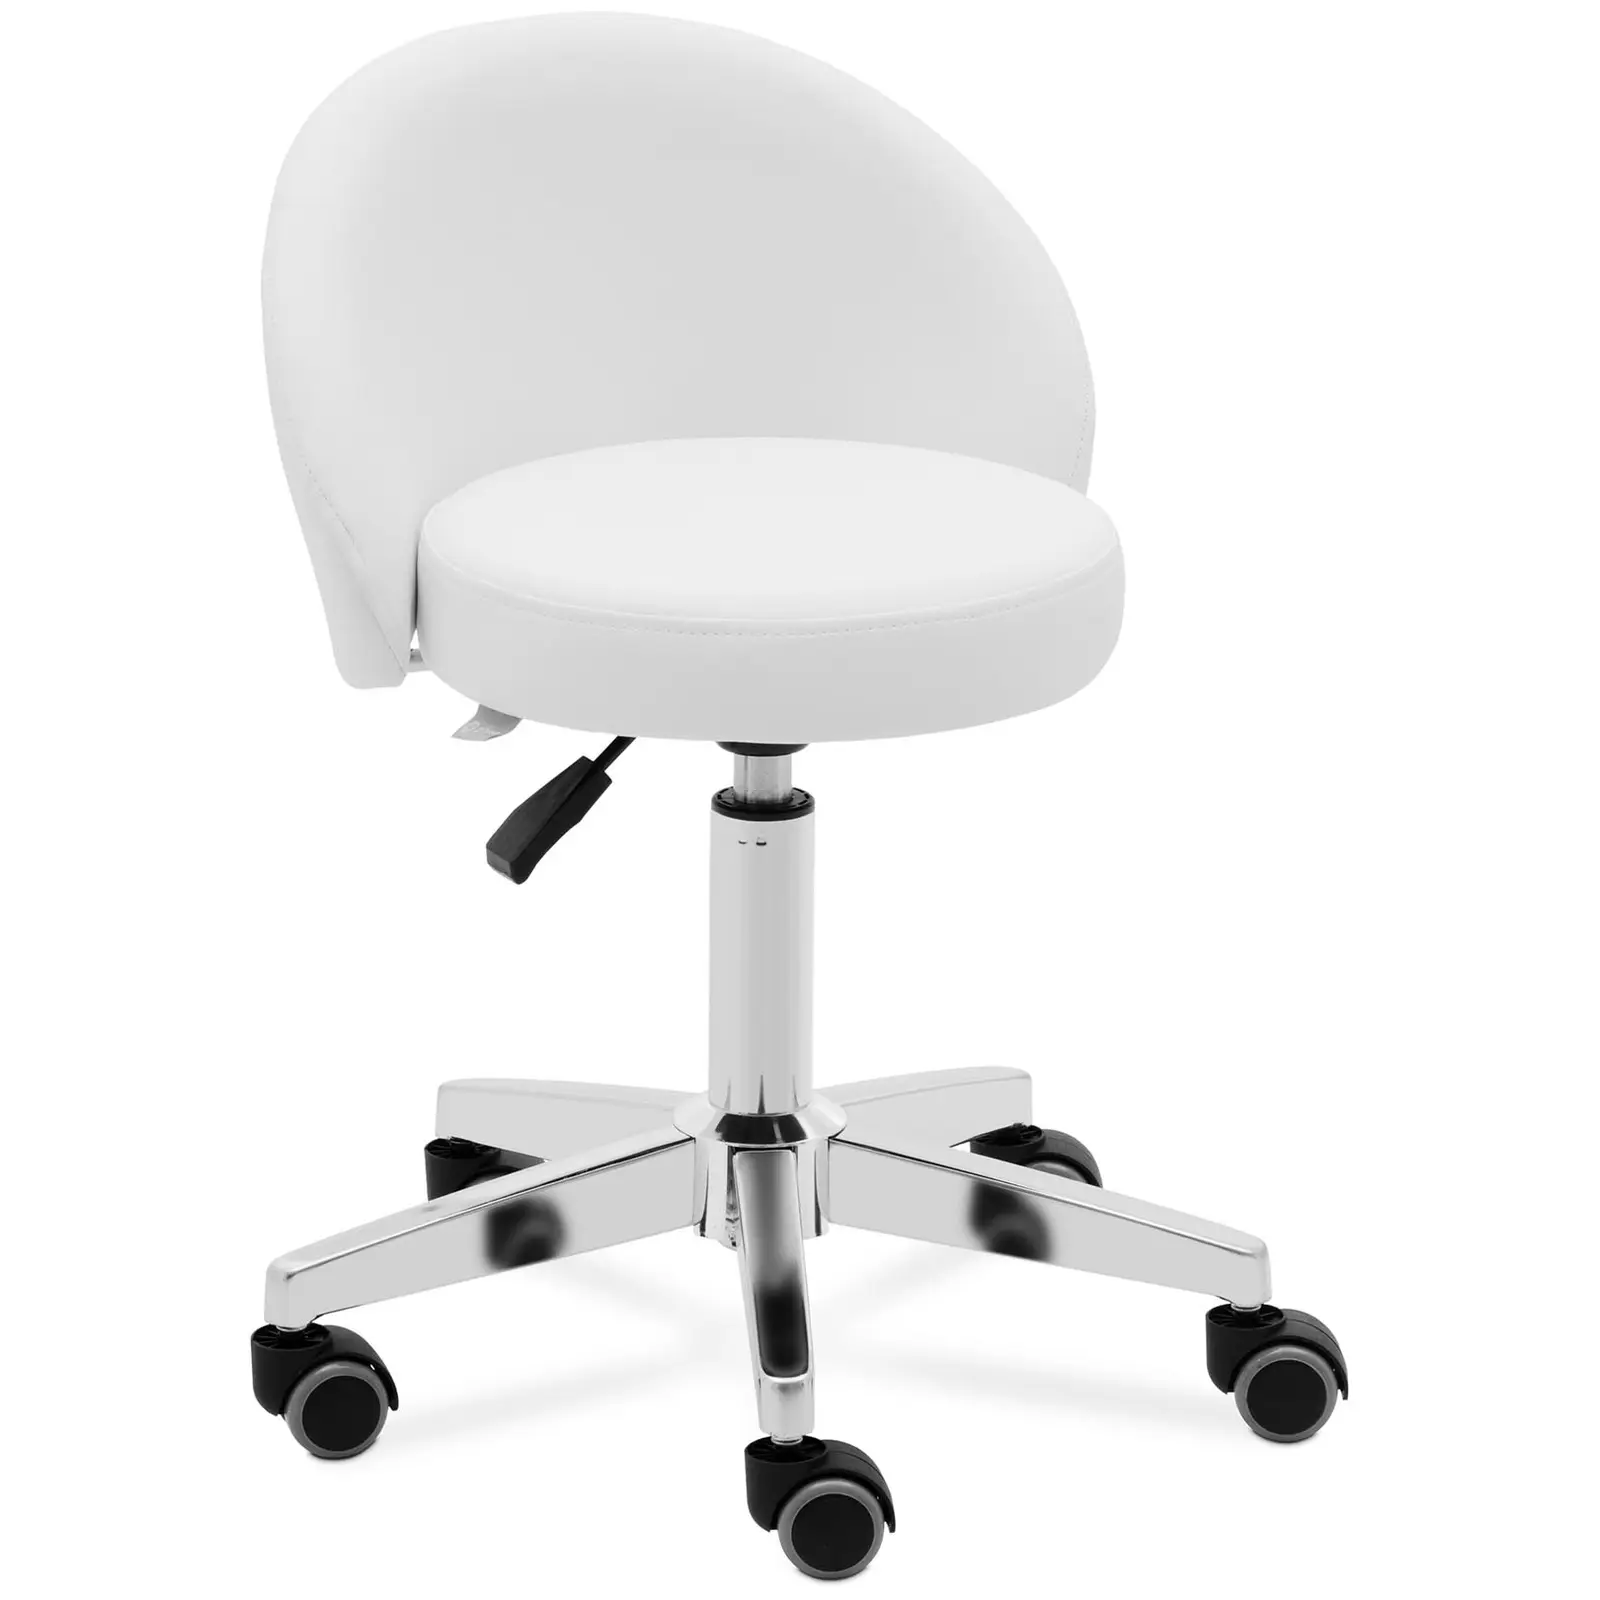 Stool Chair With Back - 43 - 57 cm - 150 kg - white